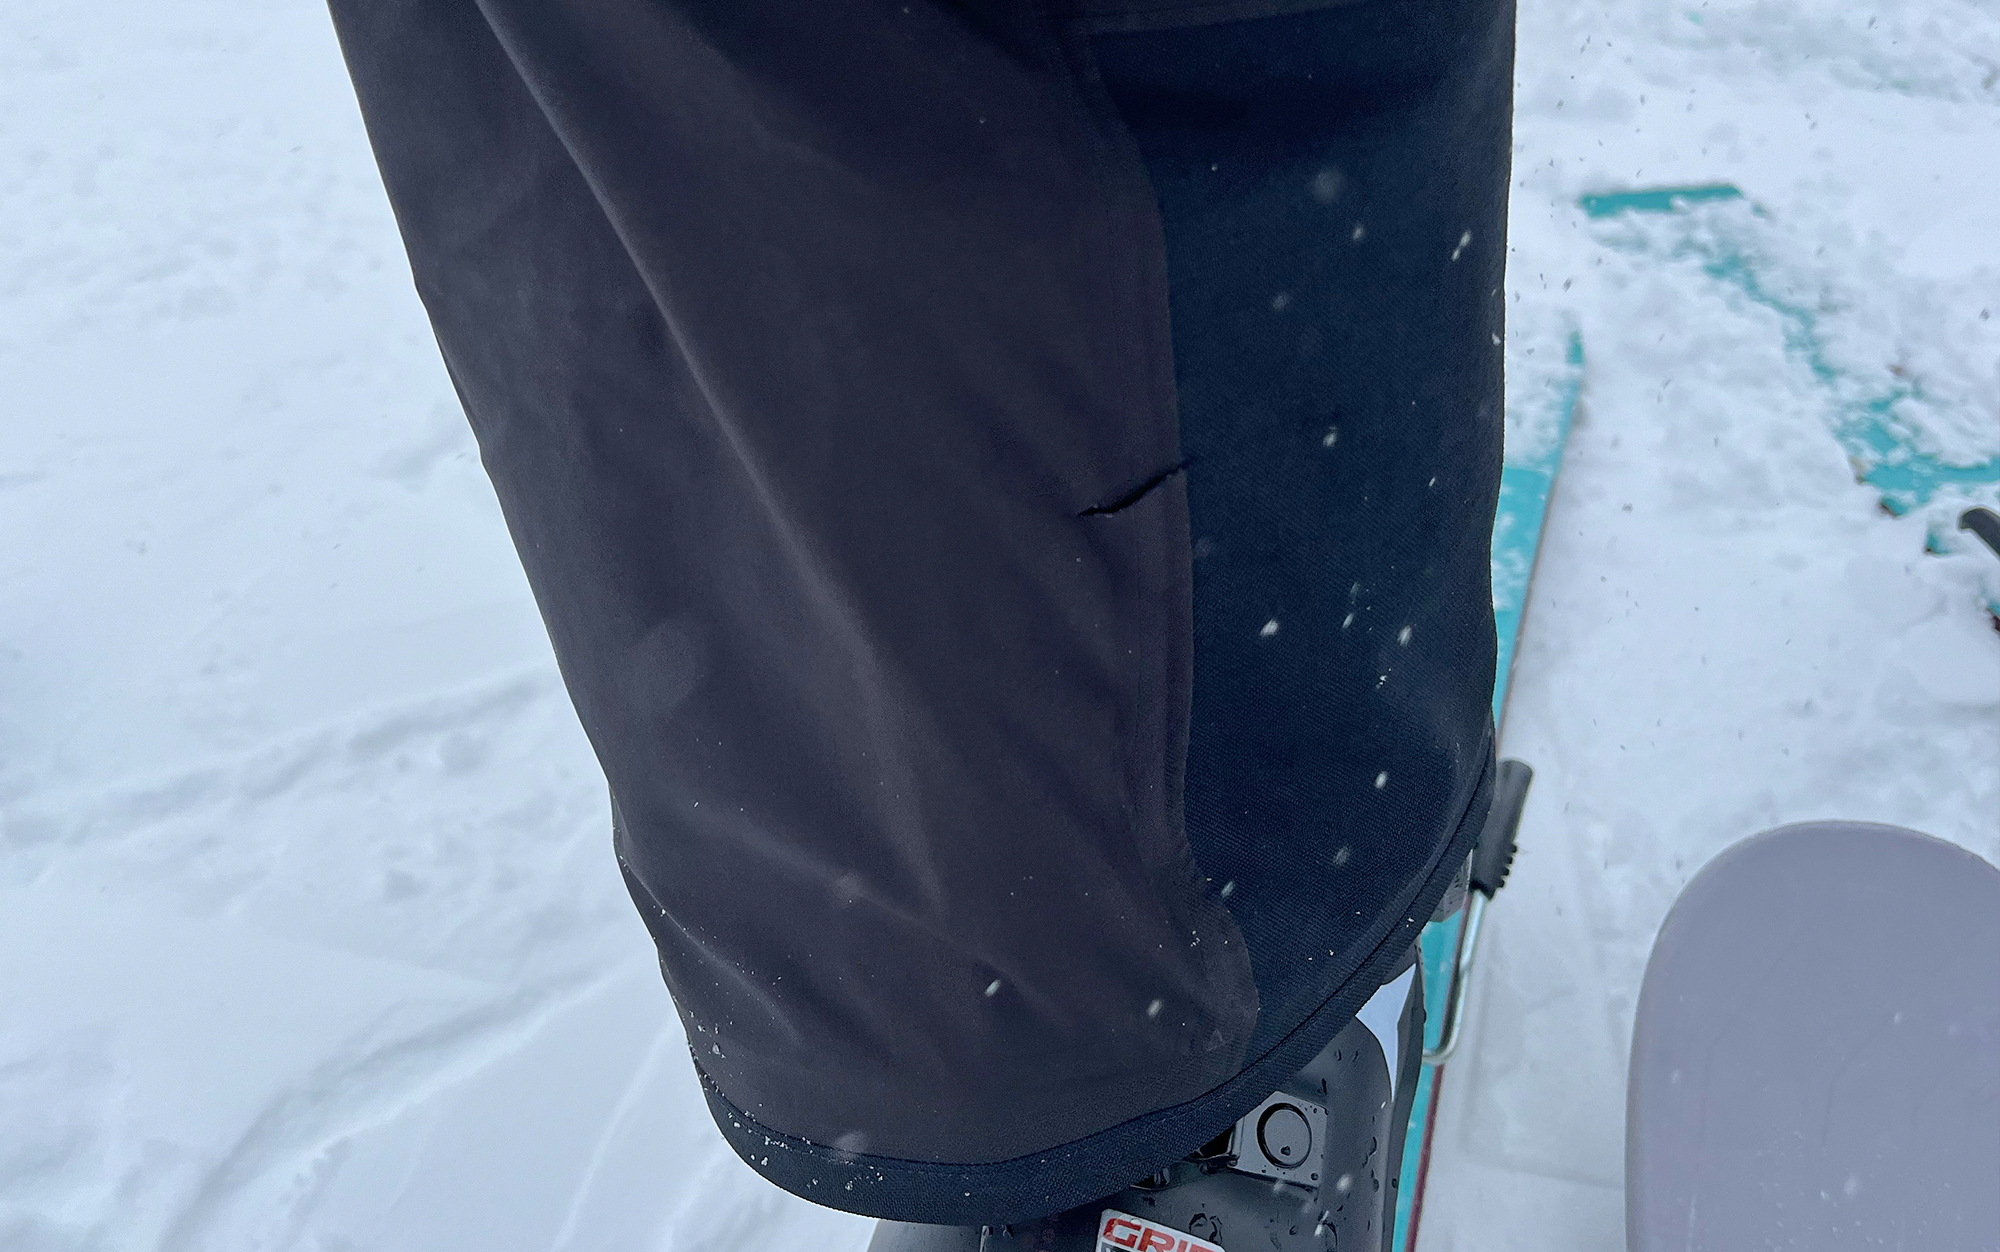 Here is the most offensive tear. It wasn’t able to penetrate the reinforced cuff, but I still expect more durability from the best snow pants.